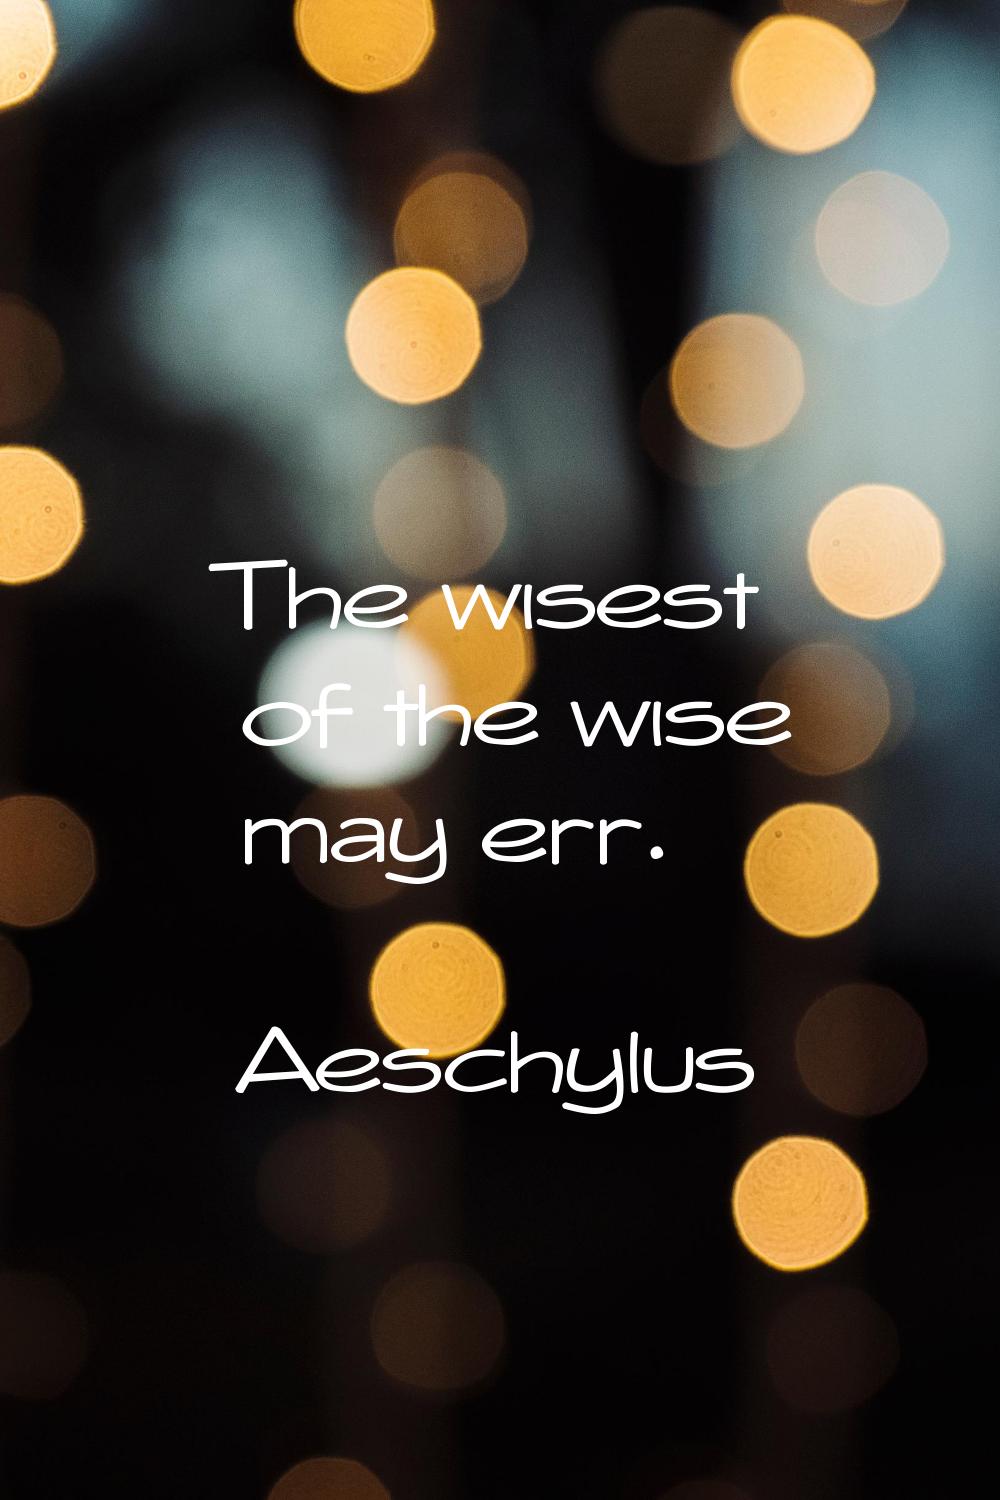 The wisest of the wise may err.